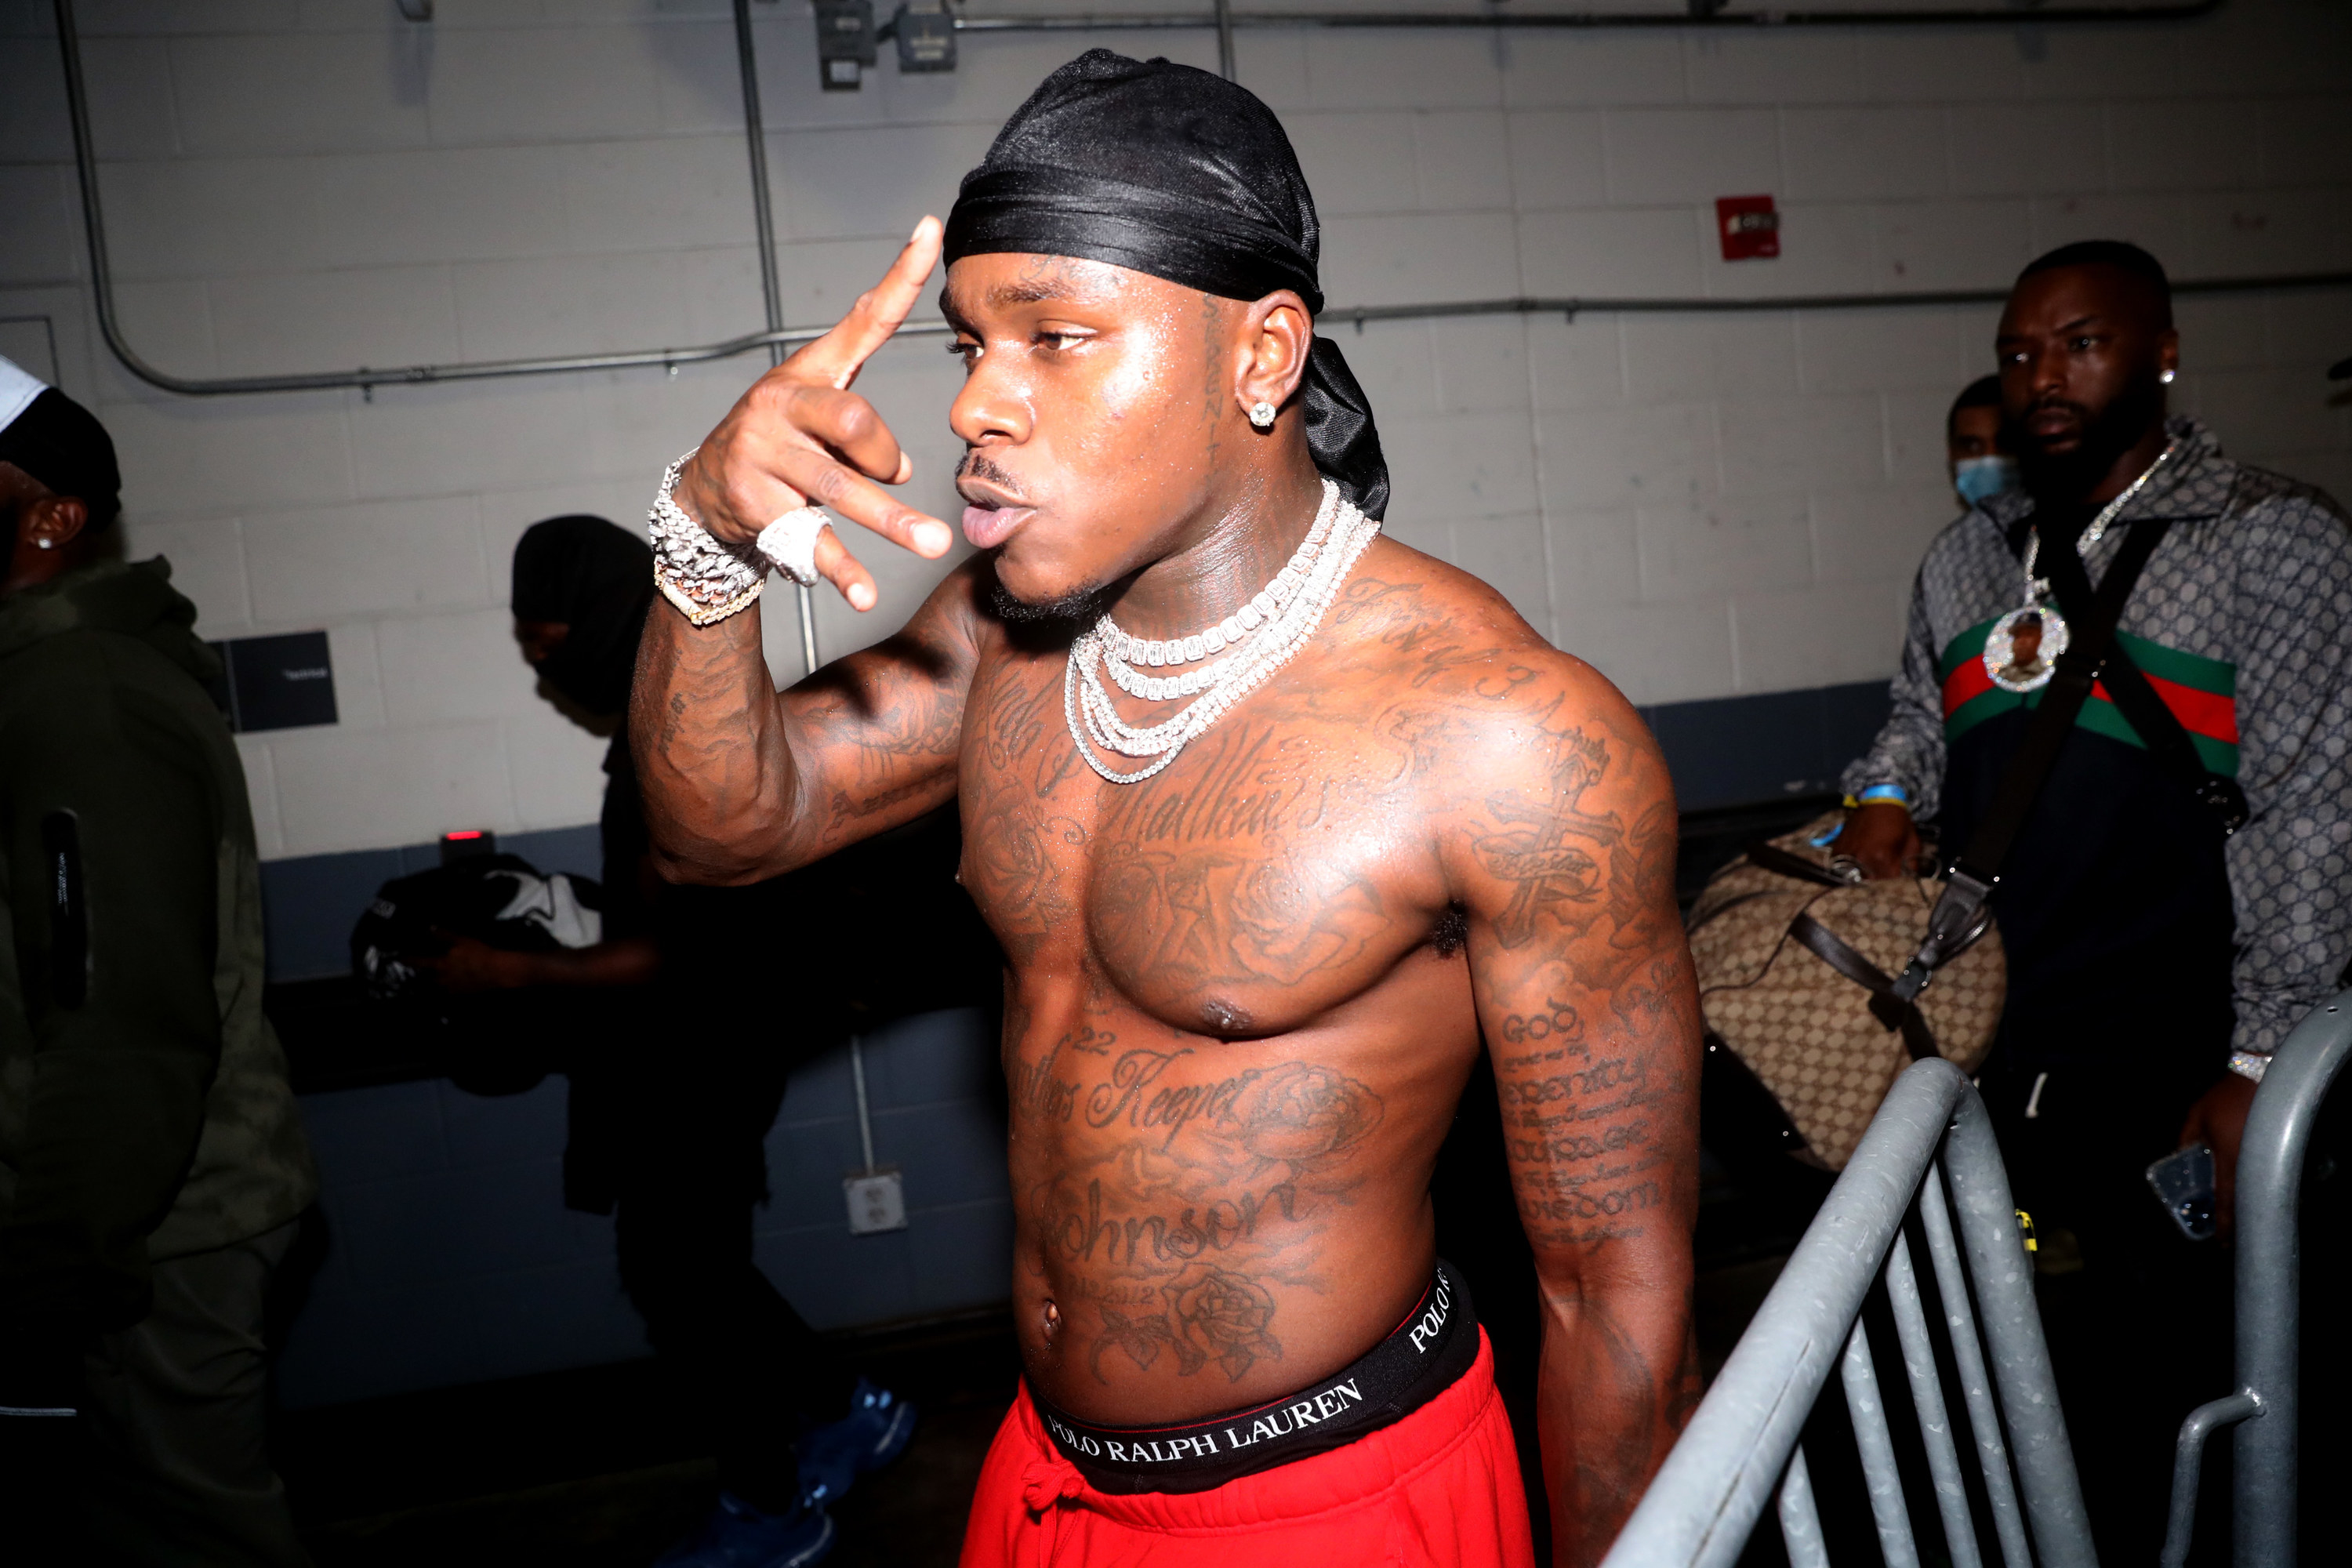 DaBaby backstage at an event